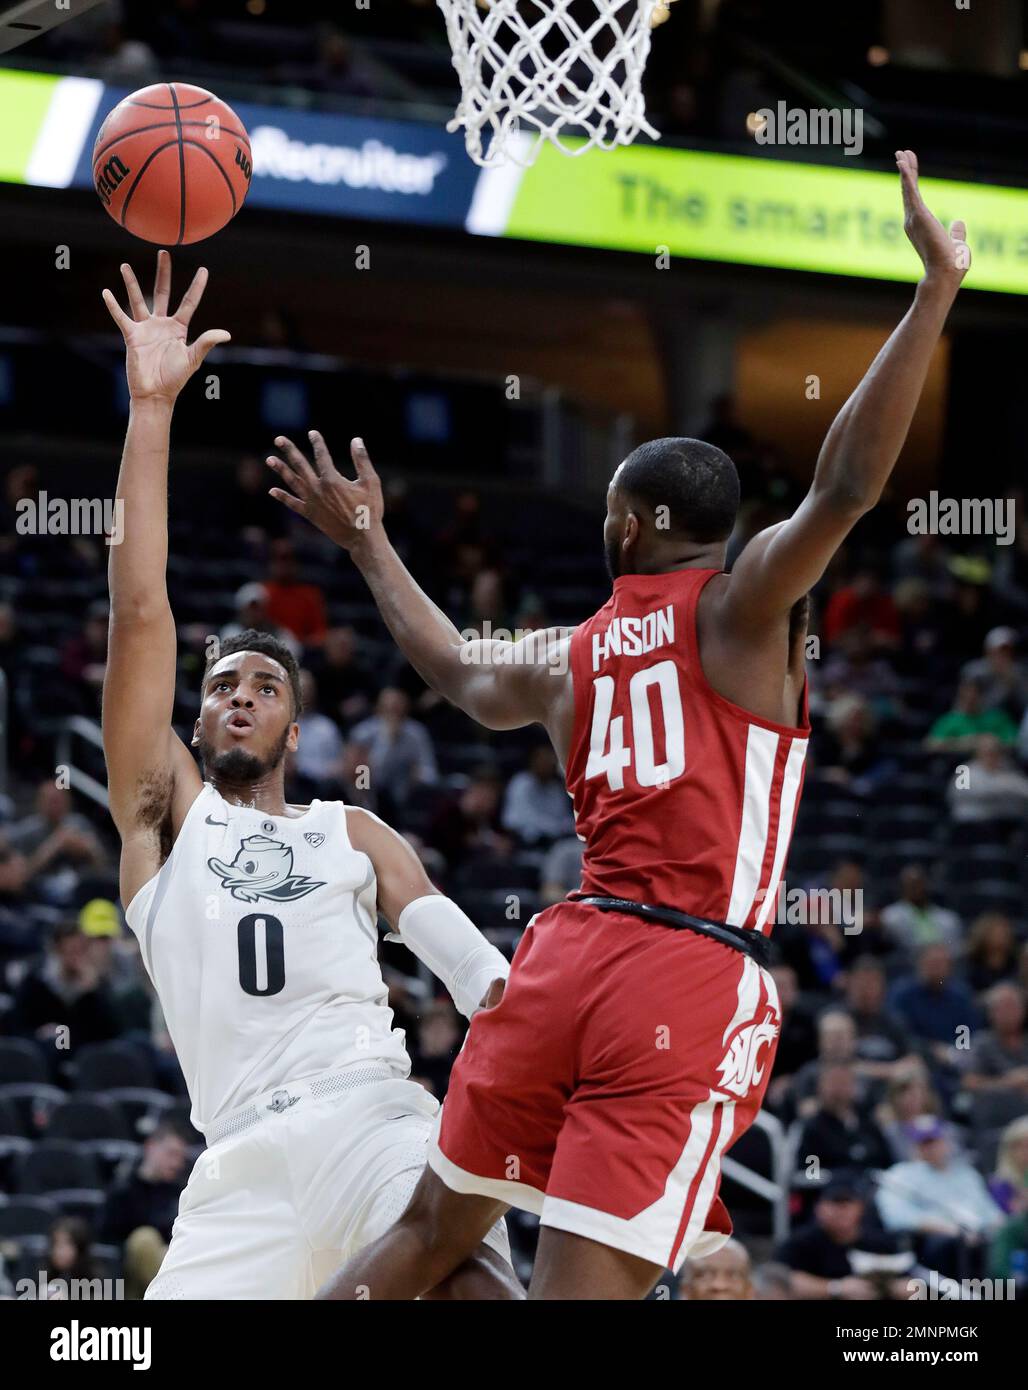 Oregon's Troy Brown, left, shoots while covered by Washington